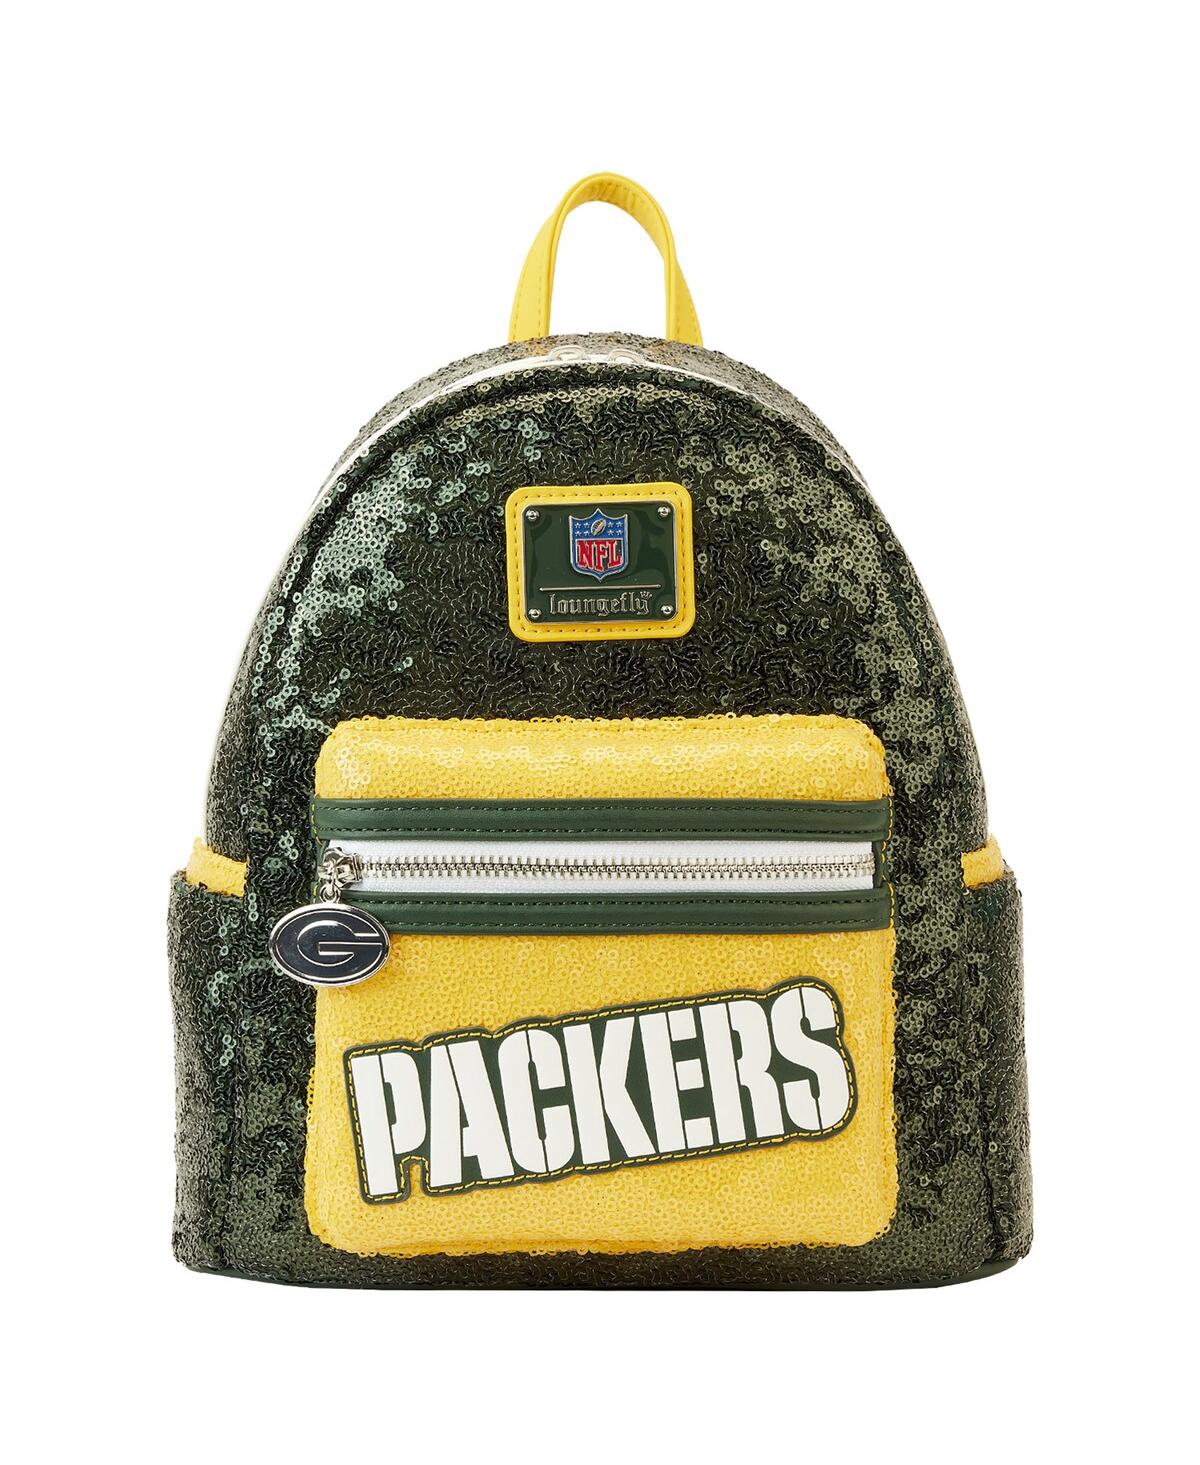 Men's and Women's Loungefly Green Bay Packers Sequin Mini Backpack - Green